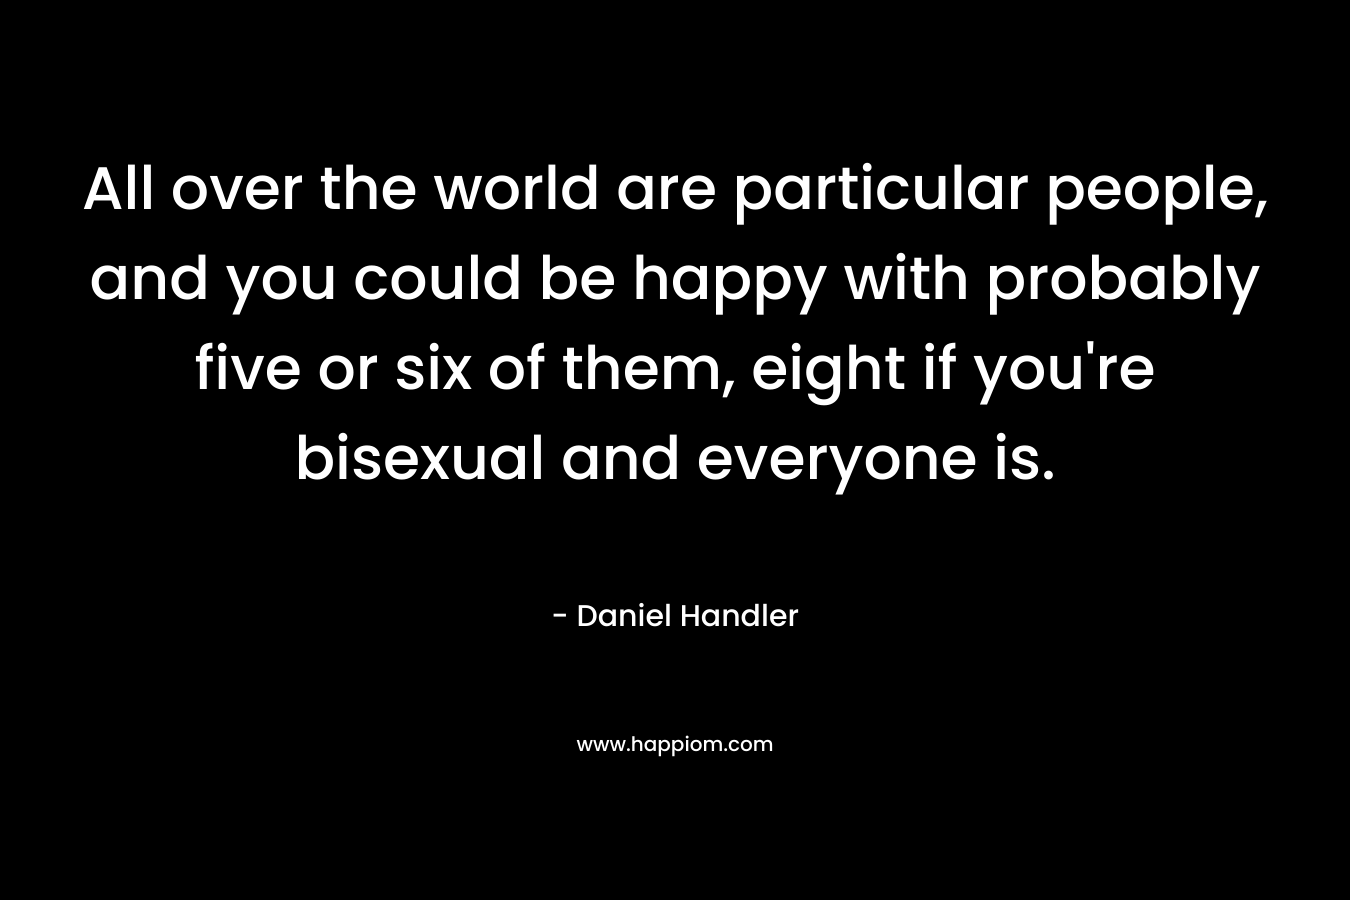 All over the world are particular people, and you could be happy with probably five or six of them, eight if you’re bisexual and everyone is. – Daniel Handler